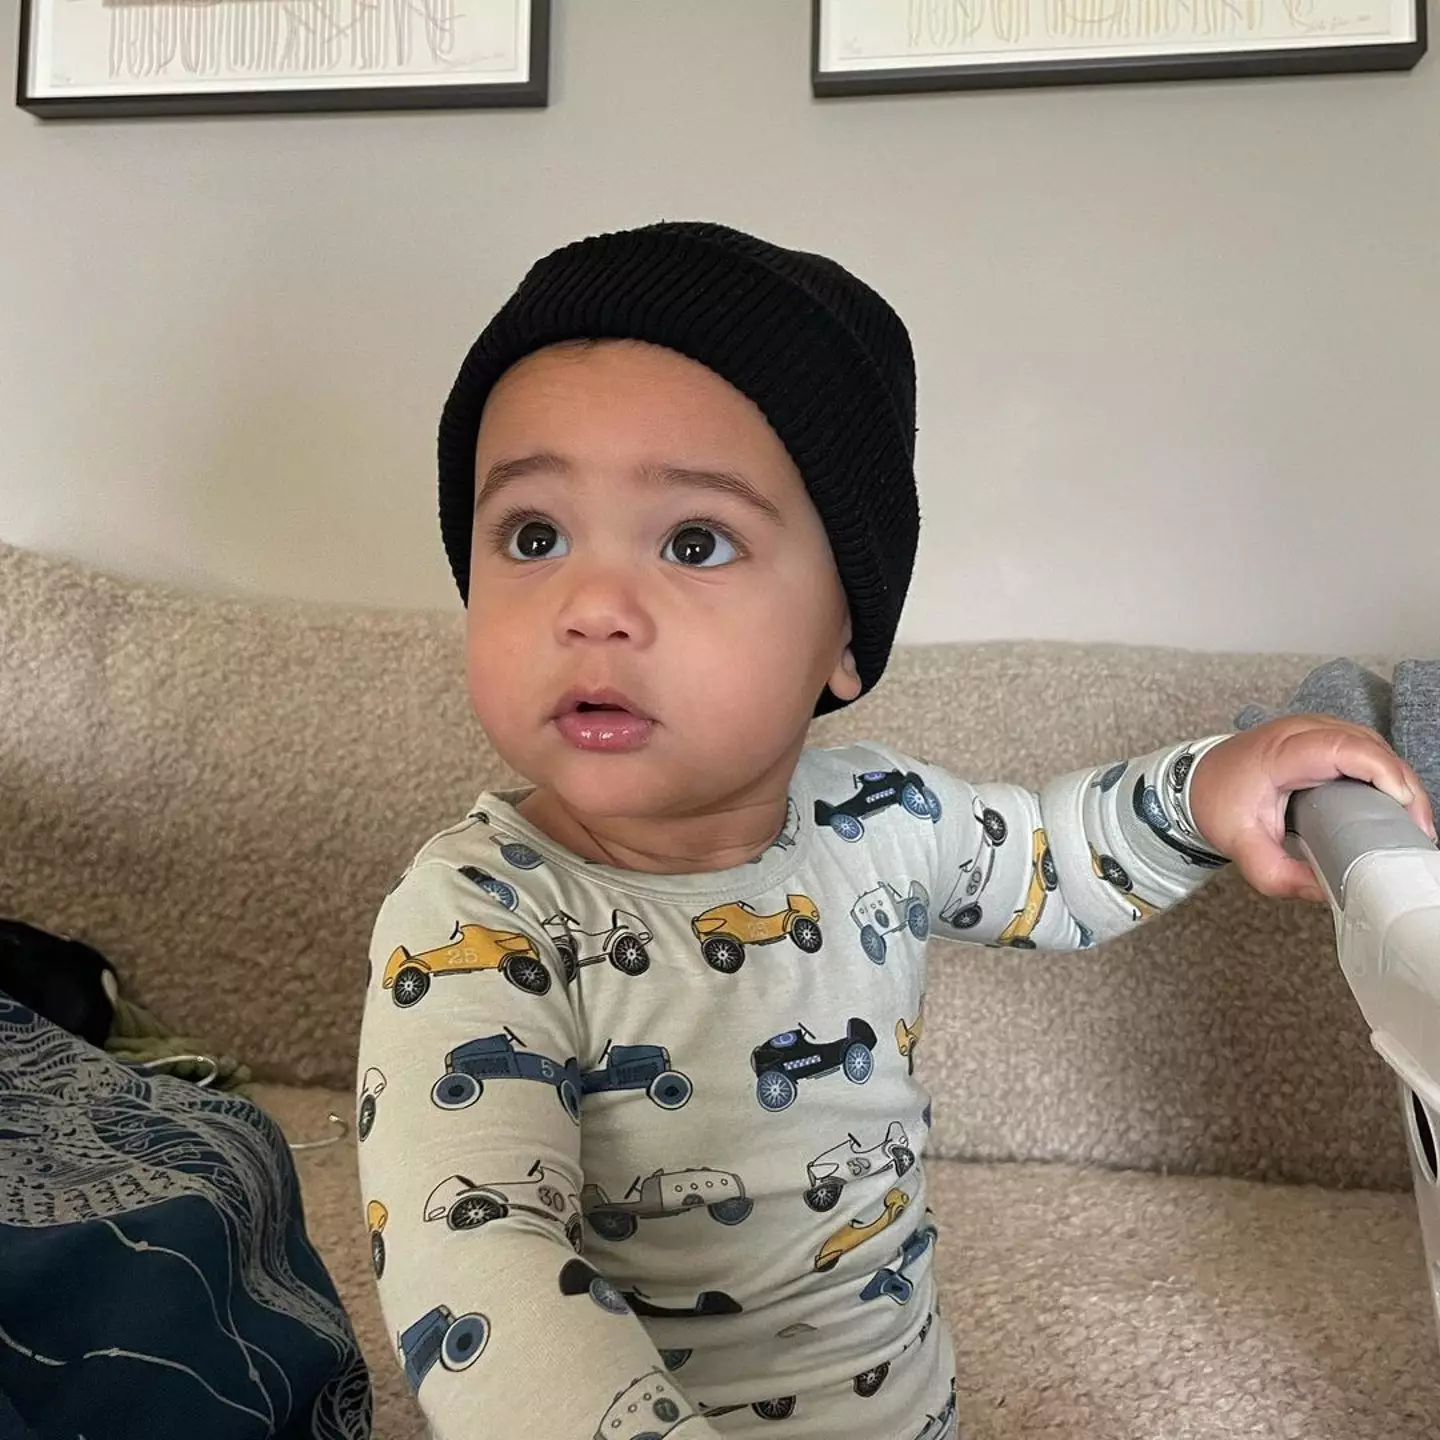 Kylie shared the first full pictures of her son's face.